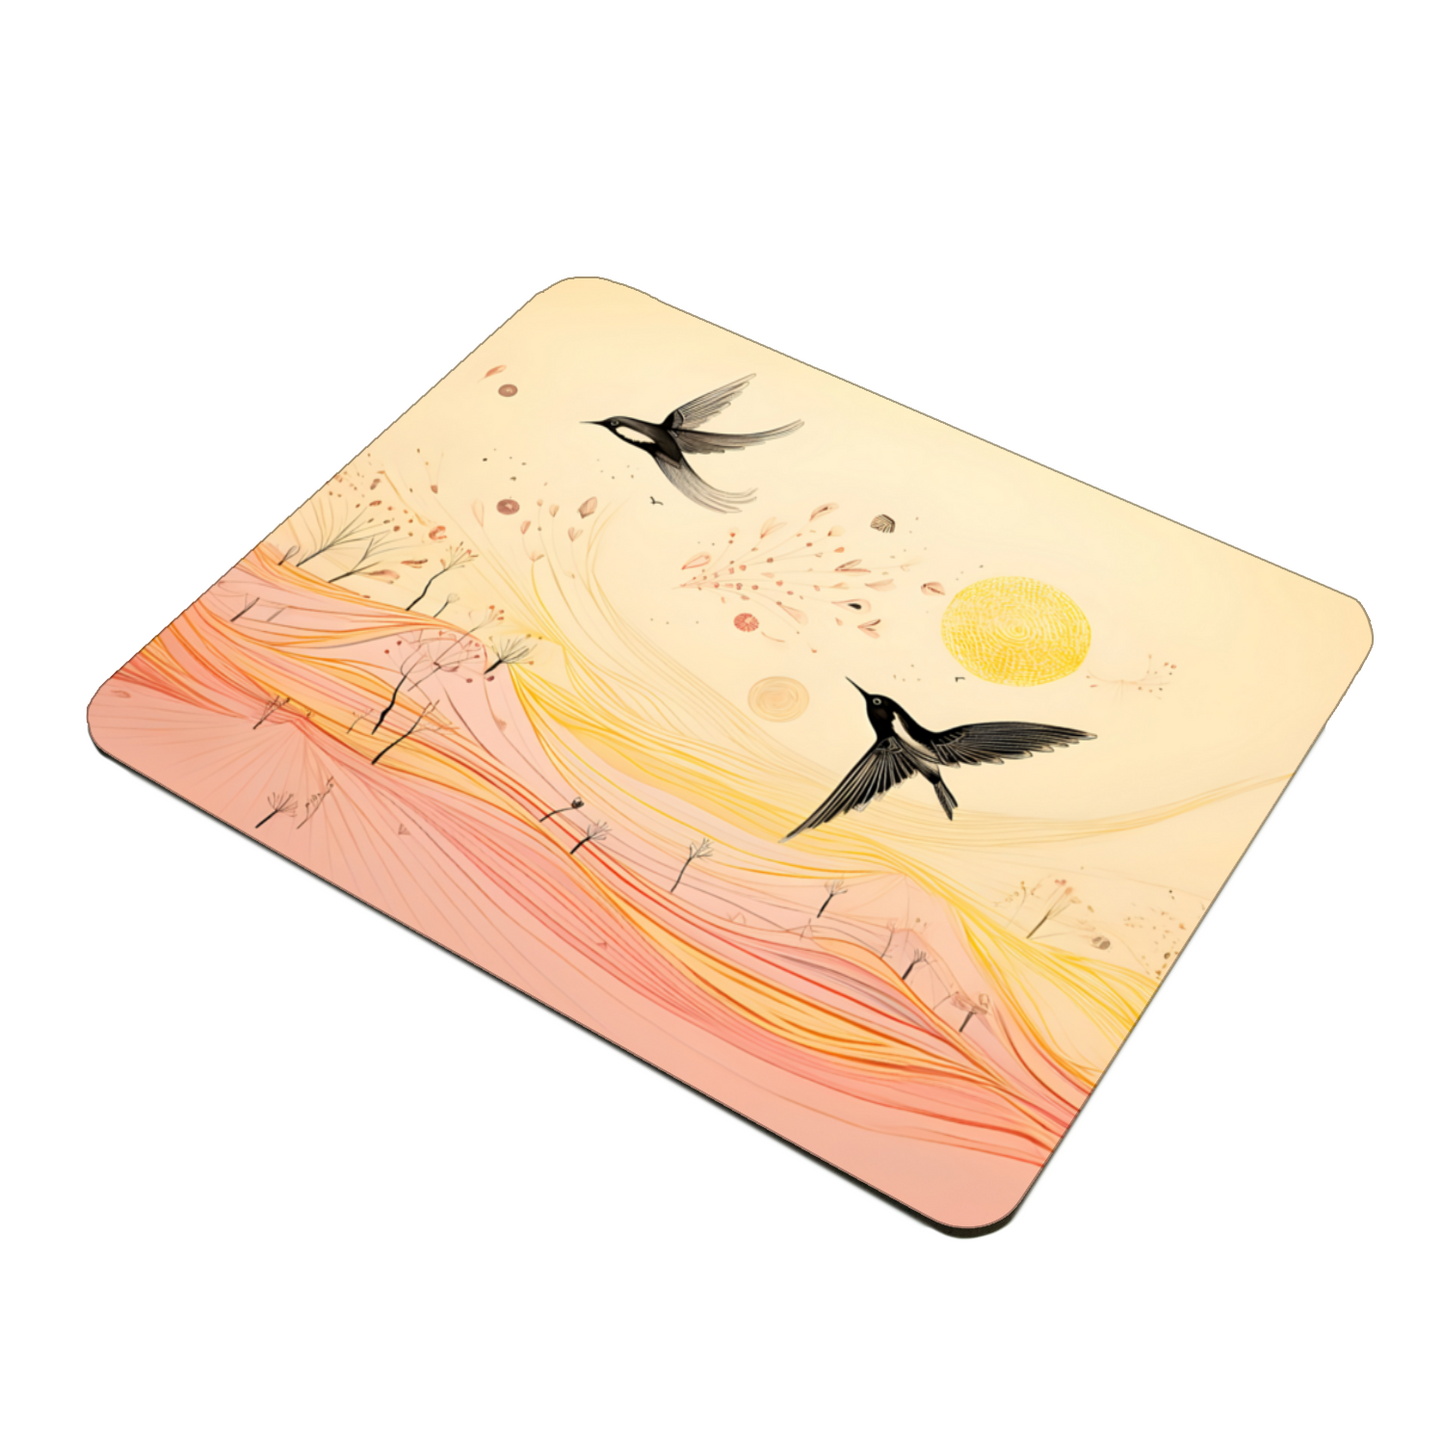 Harmony Of Swifts Wooden Placemat